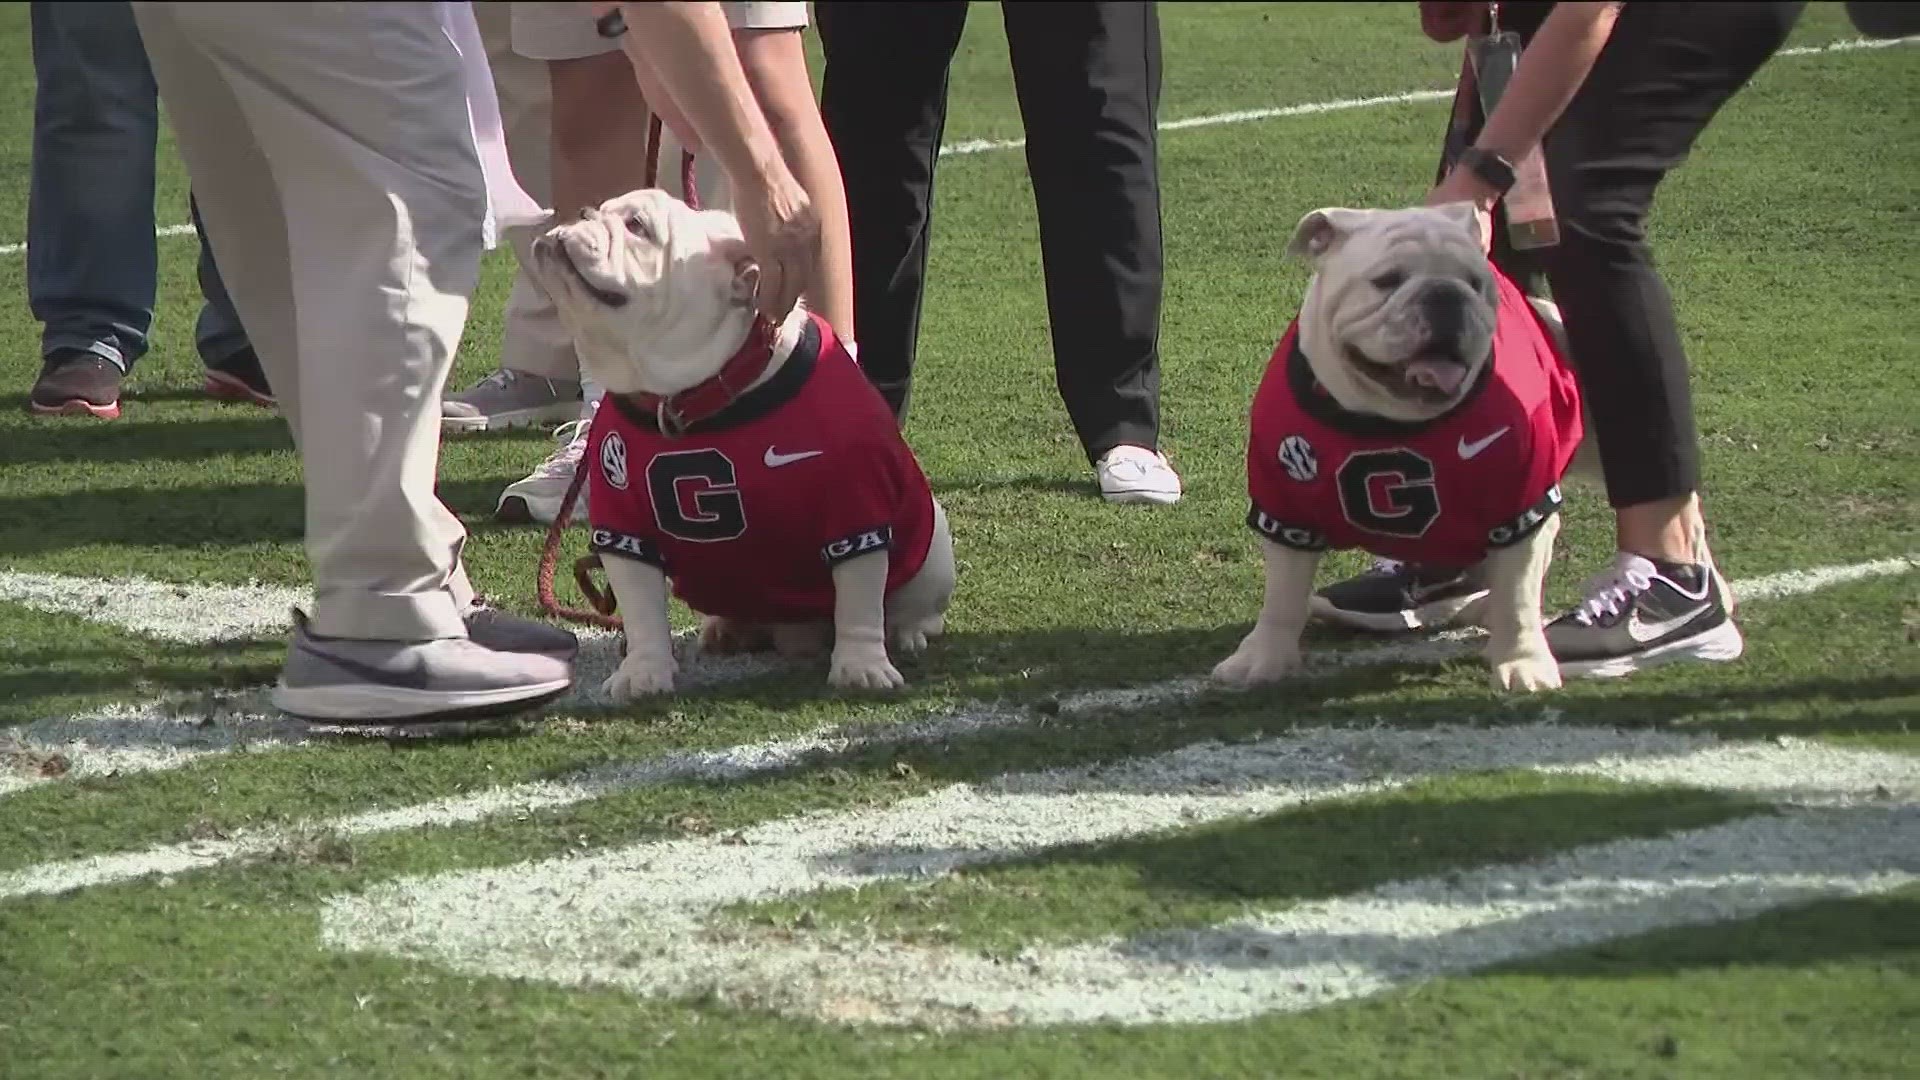 The beloved Bulldog mascots were together for a collaring ceremony before the UGA spring game.